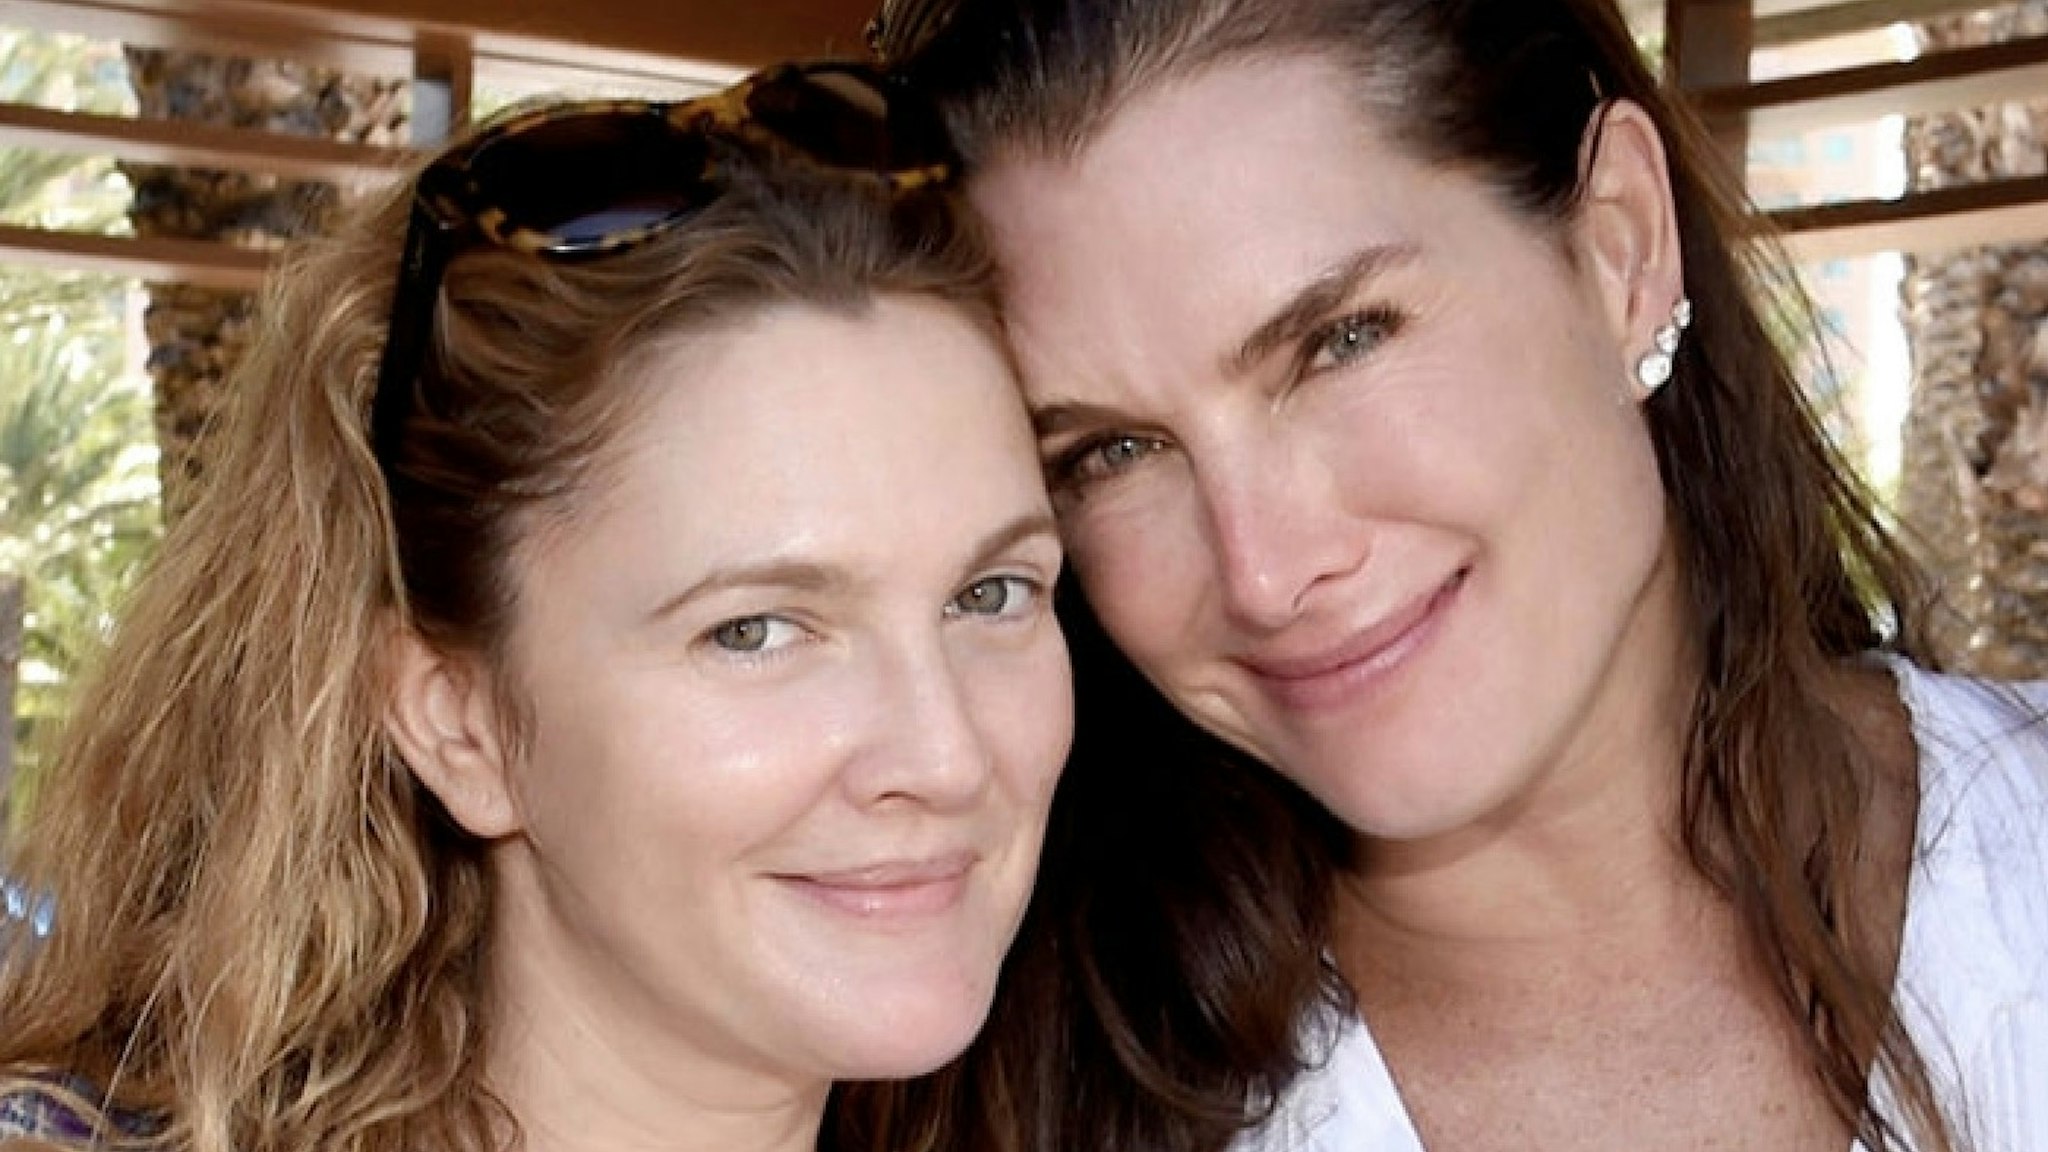 Drew Barrymore and Brooke Shields attend the weekend opening of The NEW ultra-luxury Cove Resort at Atlantis Paradise Island on November 4, 2017 in The Bahamas. (Photo by Kevin Mazur/Getty Images for The Cove, Paradise Island)